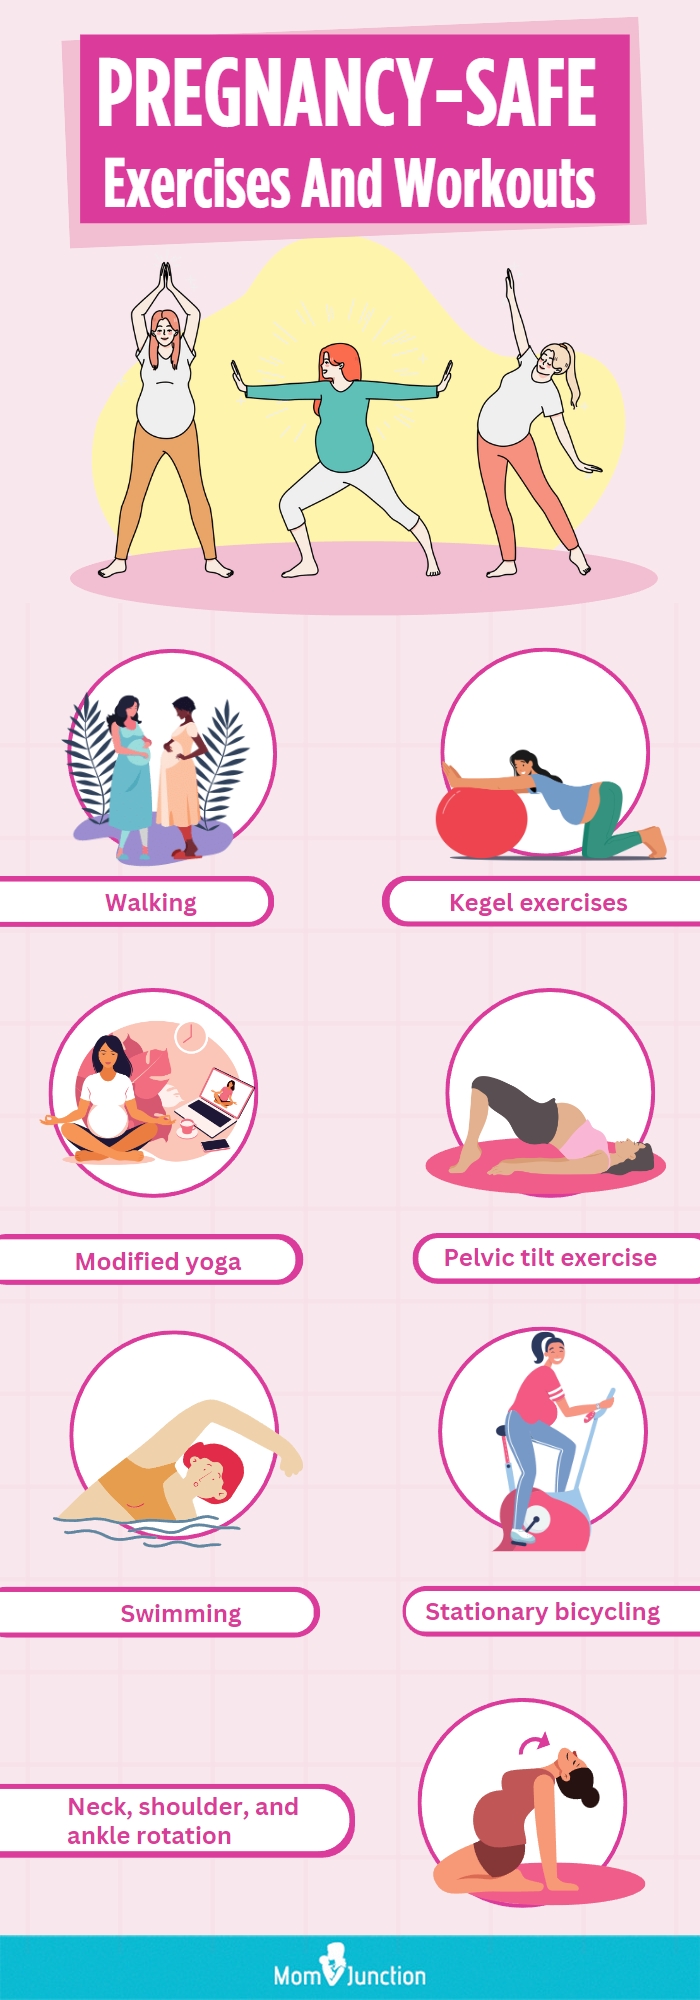 Safe And Effective Pre-Pregnancy Workouts: Enhancing Your Pregnancy Journey